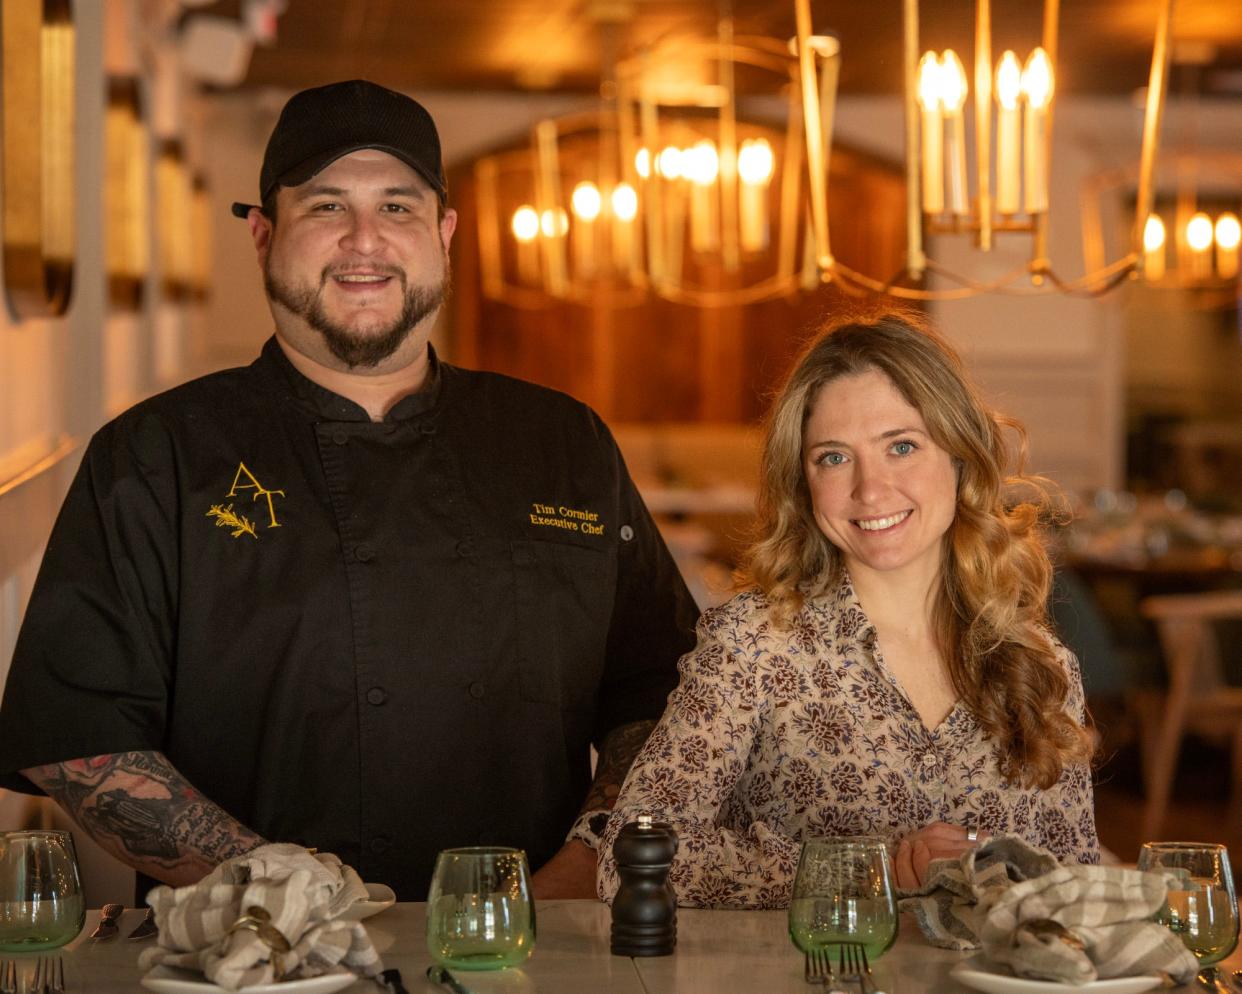 Executive chef Tim Cormier and owner Sarah Storie at Anna’s Table in Leominster.